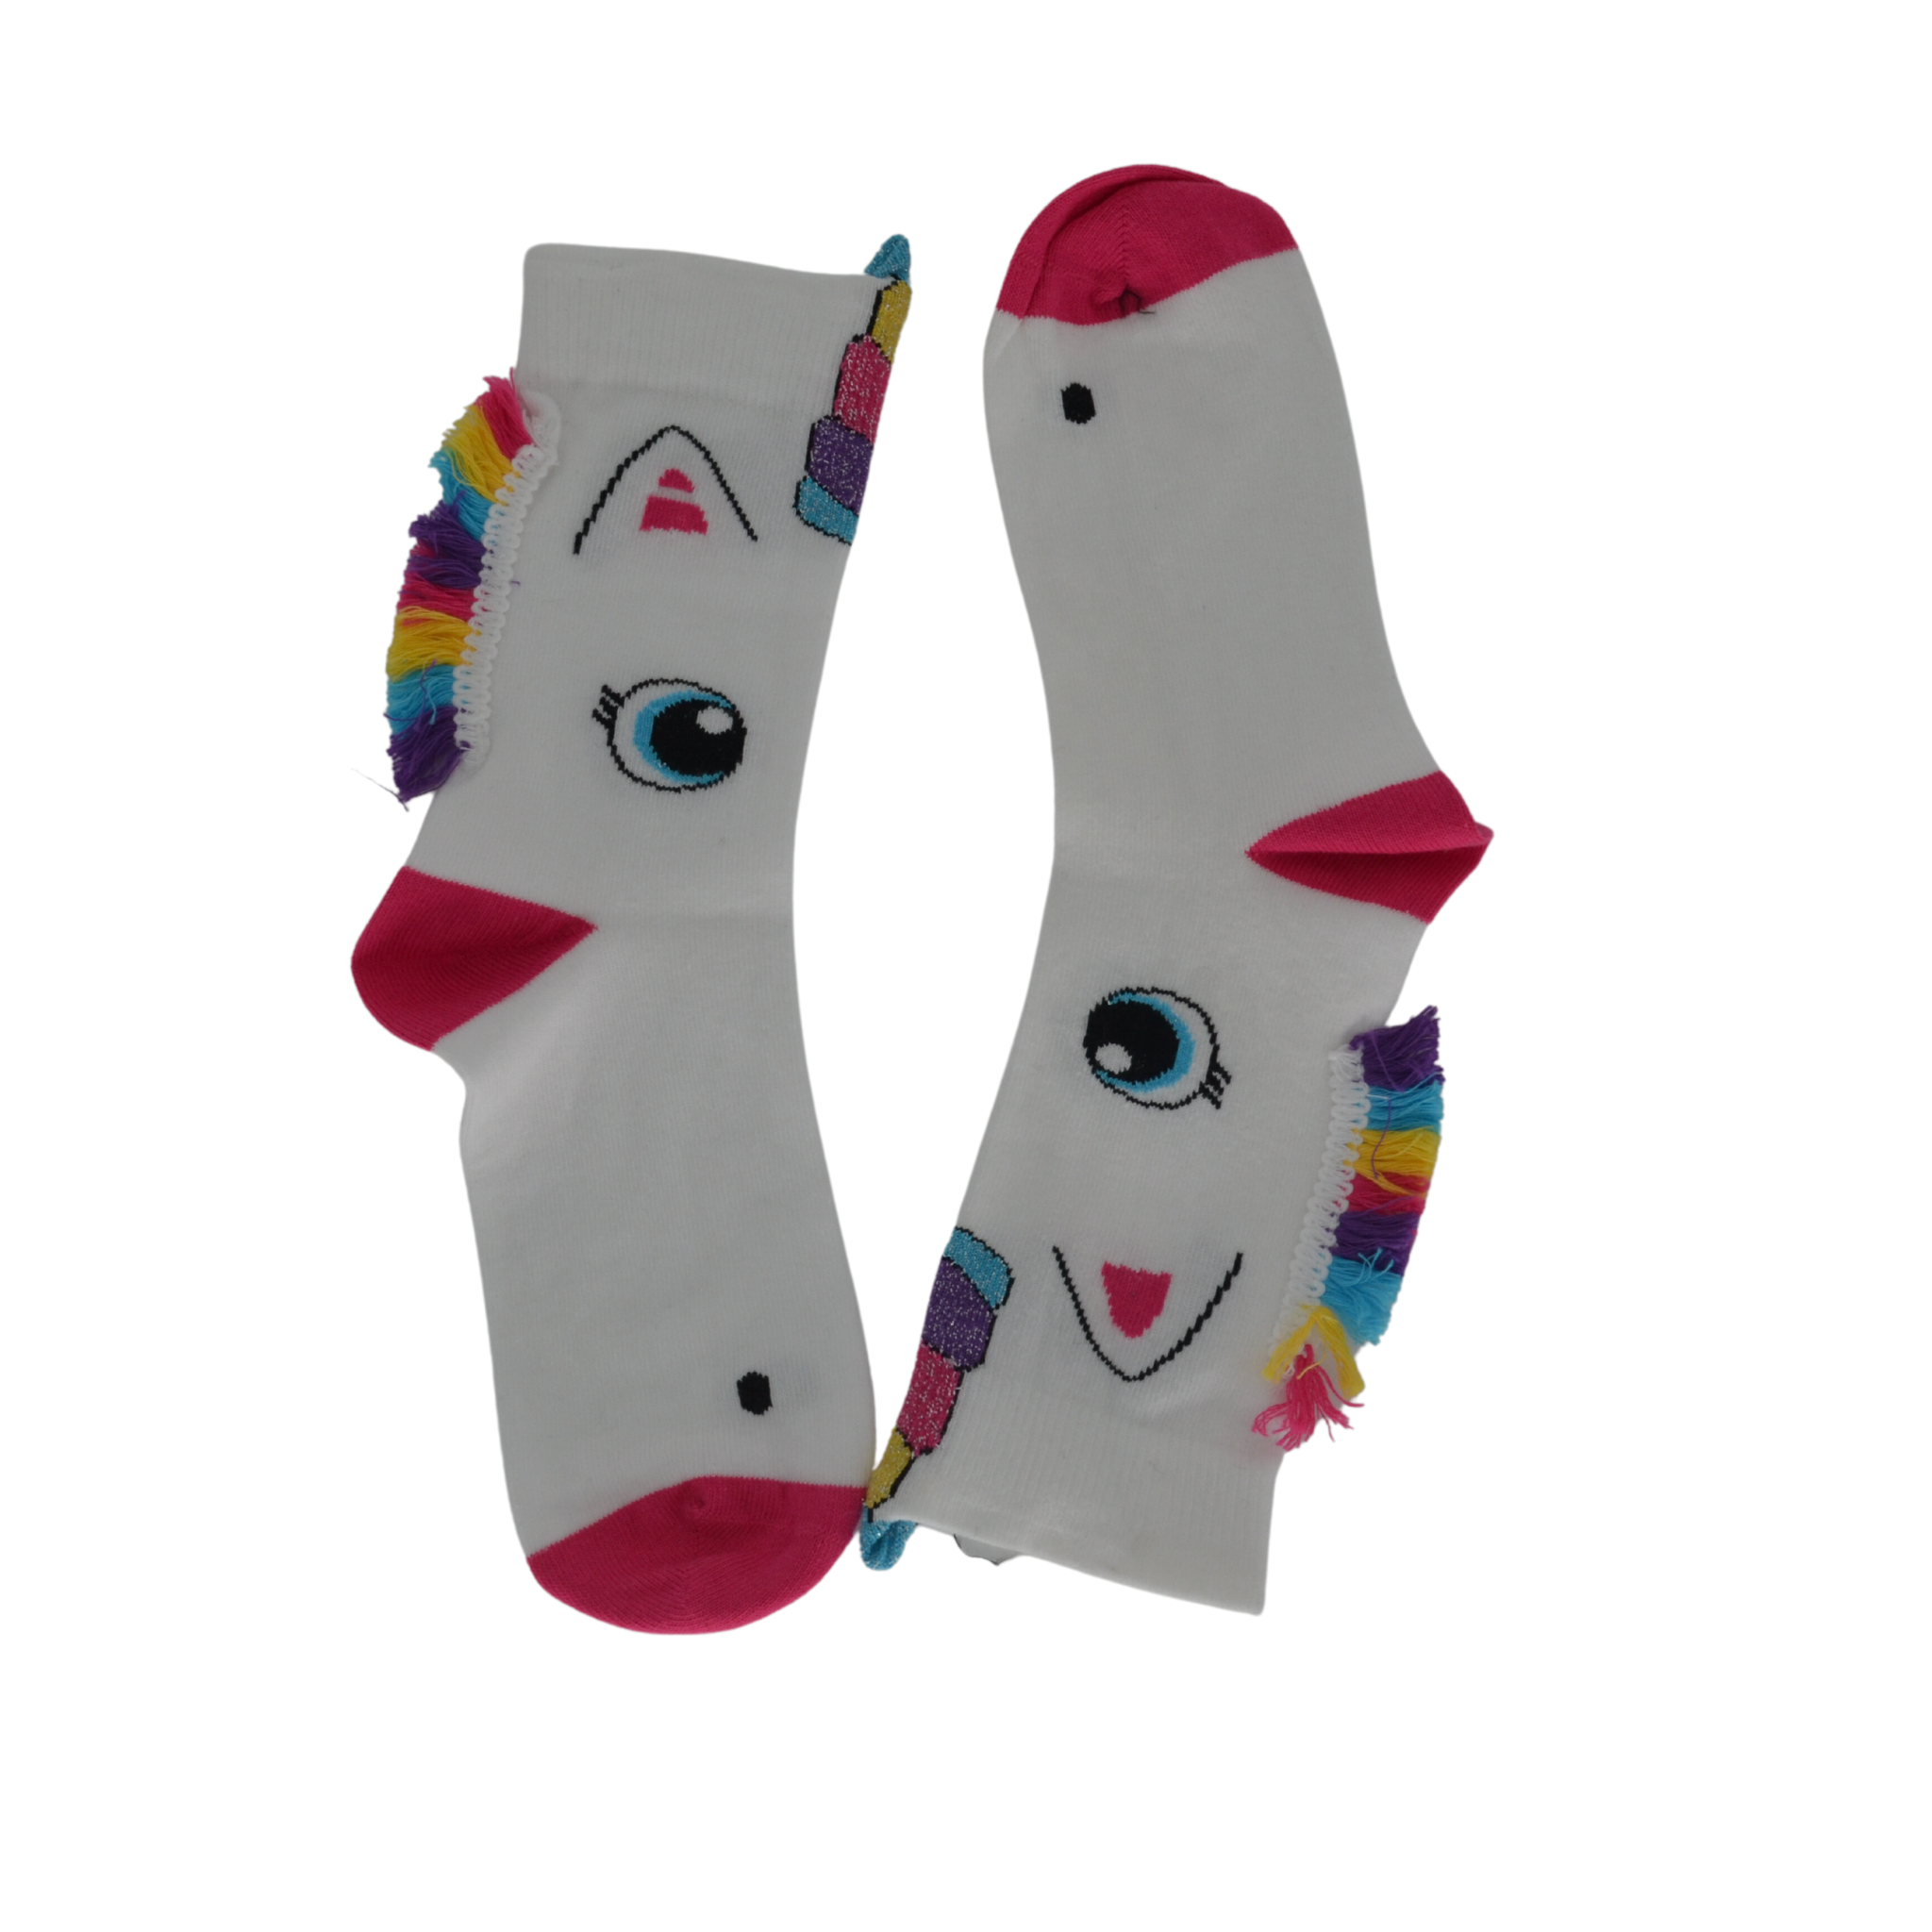 City of Clouds - Combed Cotton Novelty Print Socks - Kids & Adults